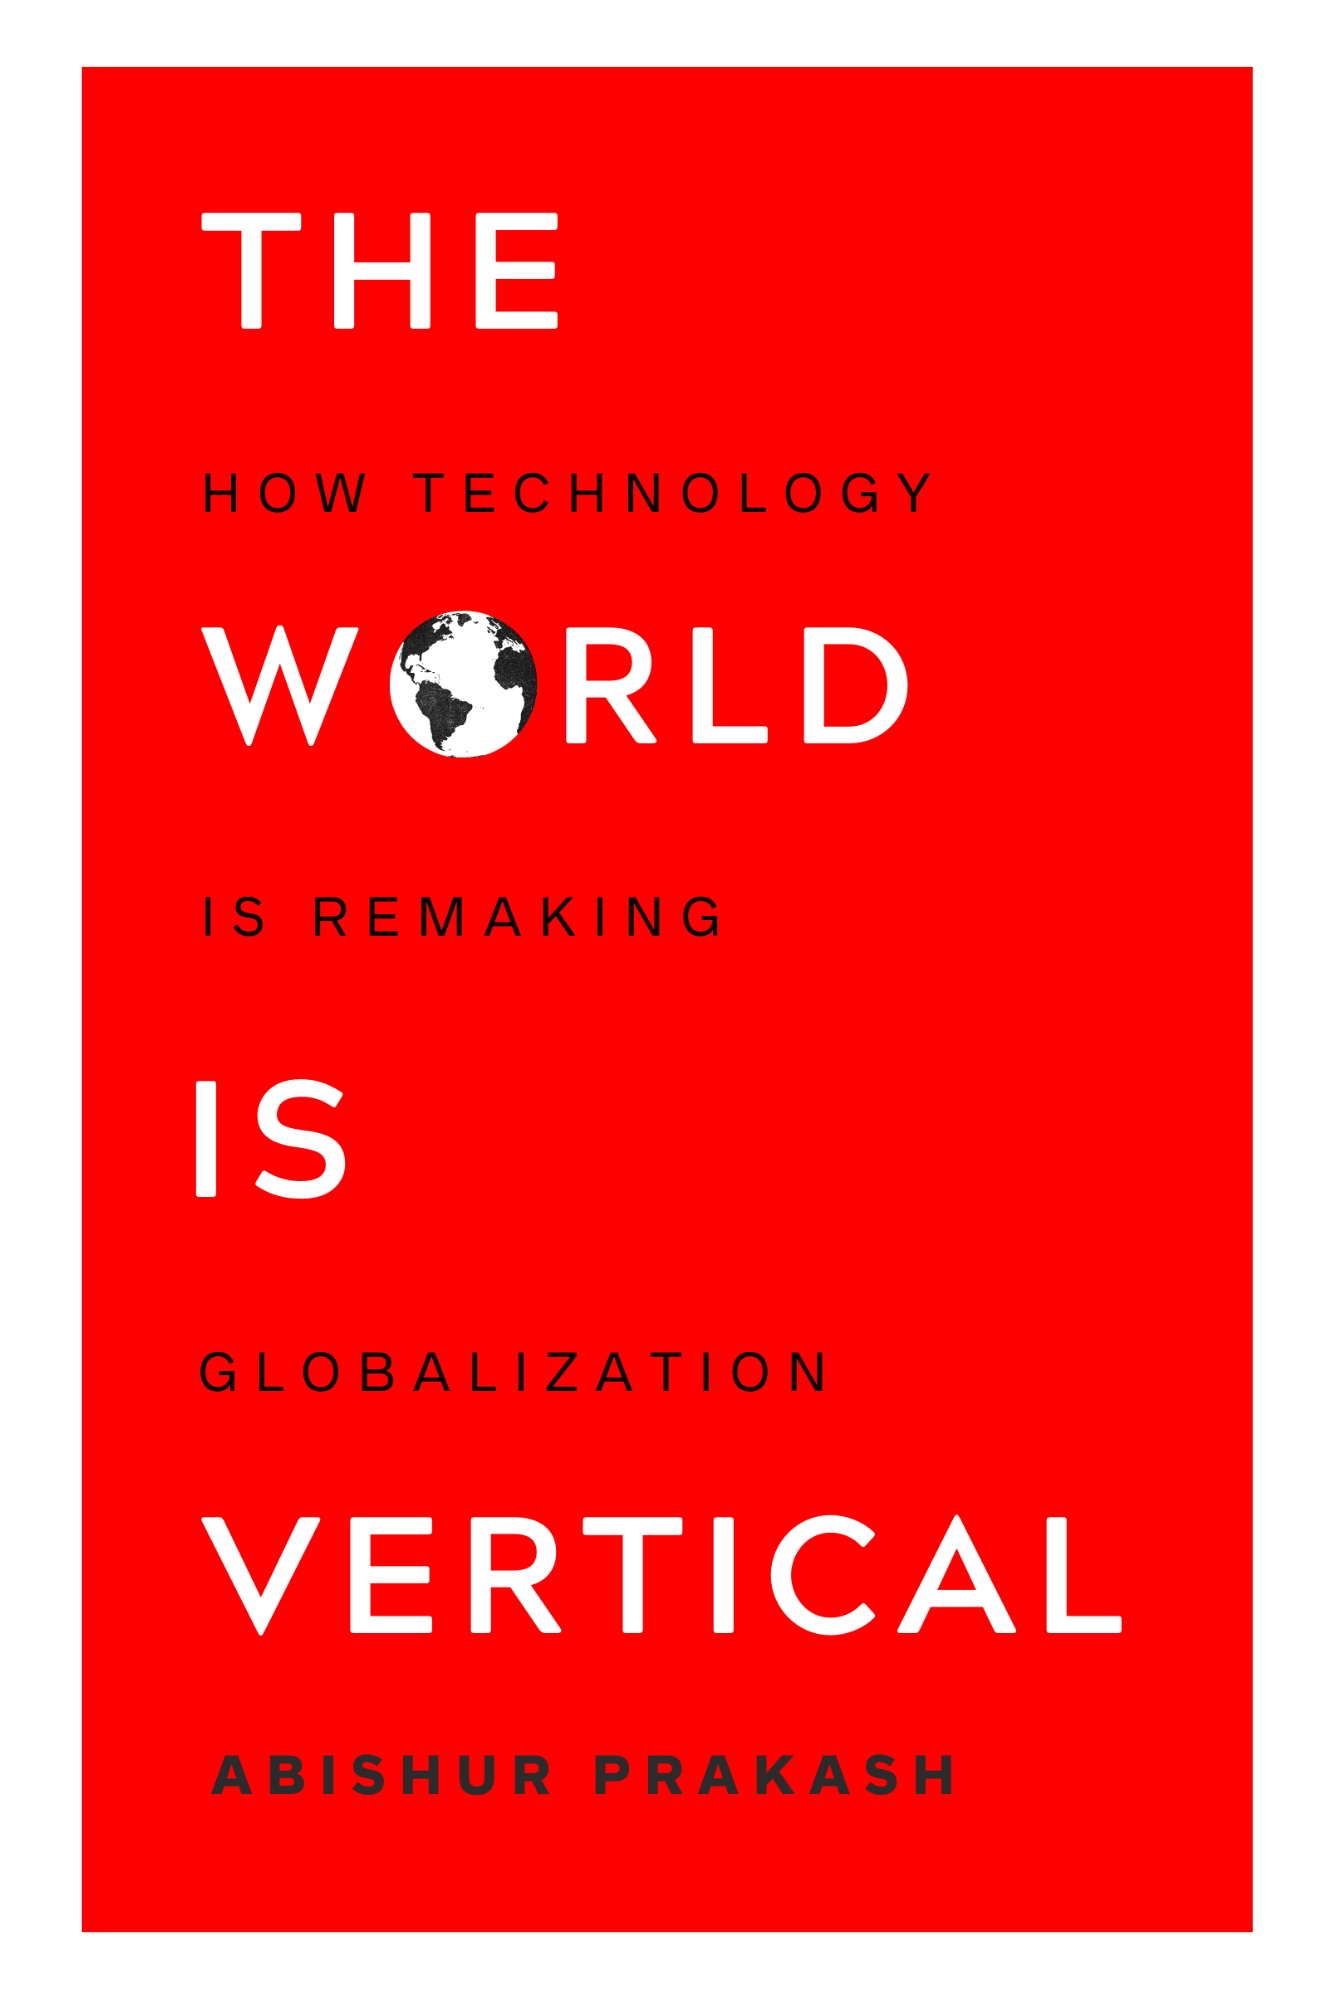 Center for Innovating the Future Publishes a Groundbreaking New Book on the Future of Globalization